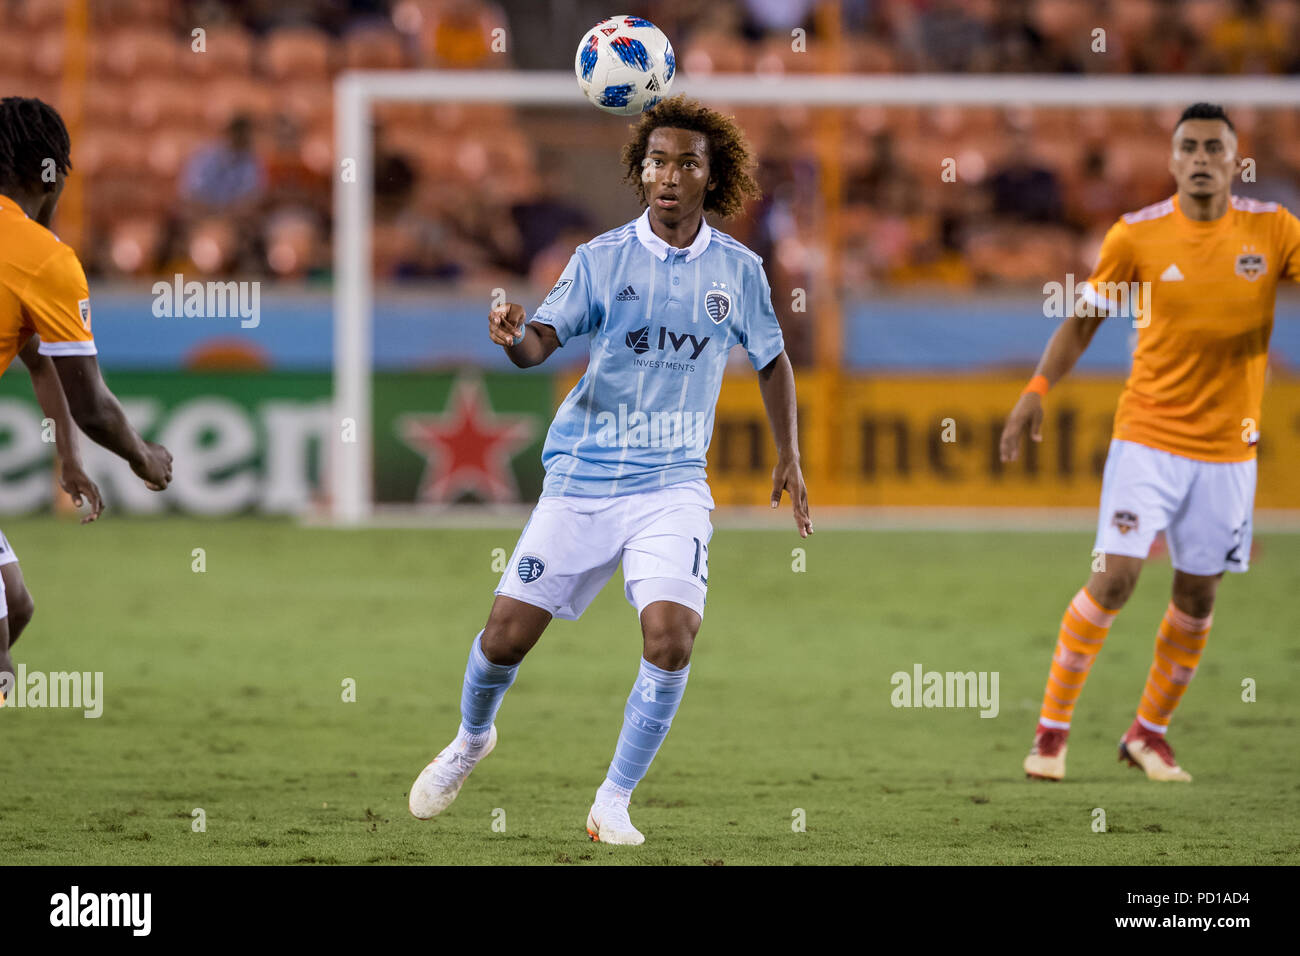 Houston, USA. 4 August 2018.  16 year old Sporting KC midfielder Gianluca Busio (13) controls the ball during an MLS soccer match between the Houston Dynamo and Sporting Kansas City at BBVA Compass Stadium in Houston, TX. Busio became the third-youngest player to ever start an MLS game. Kansas City won the match 1 to 0.Trask Smith/CSM Credit: Cal Sport Media/Alamy Live News Stock Photo